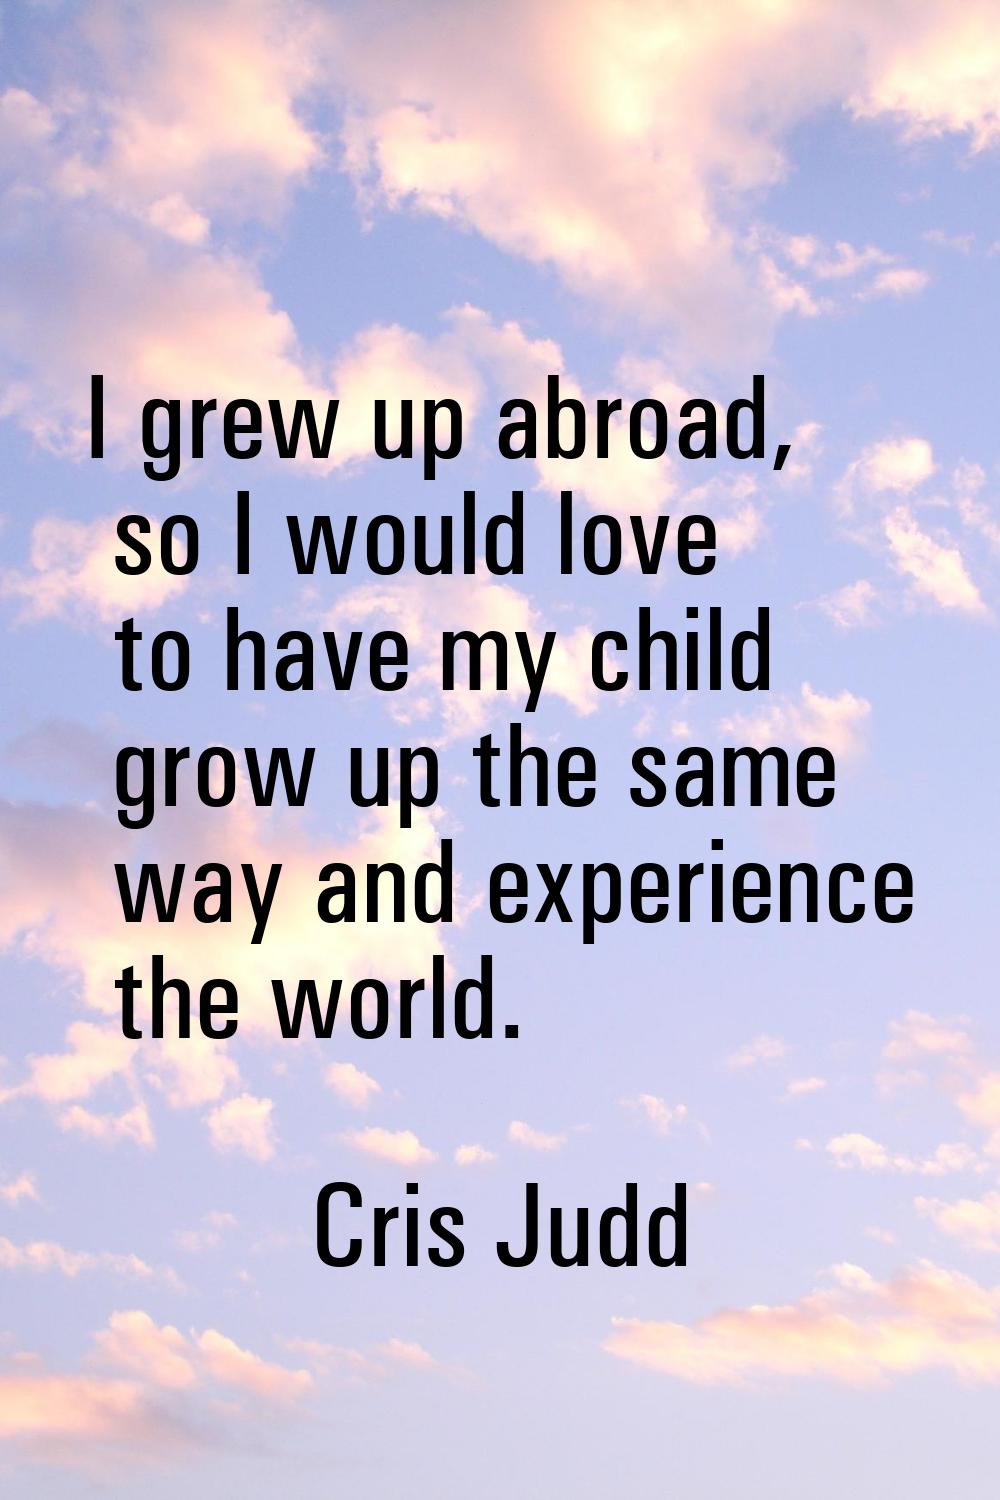 I grew up abroad, so I would love to have my child grow up the same way and experience the world.